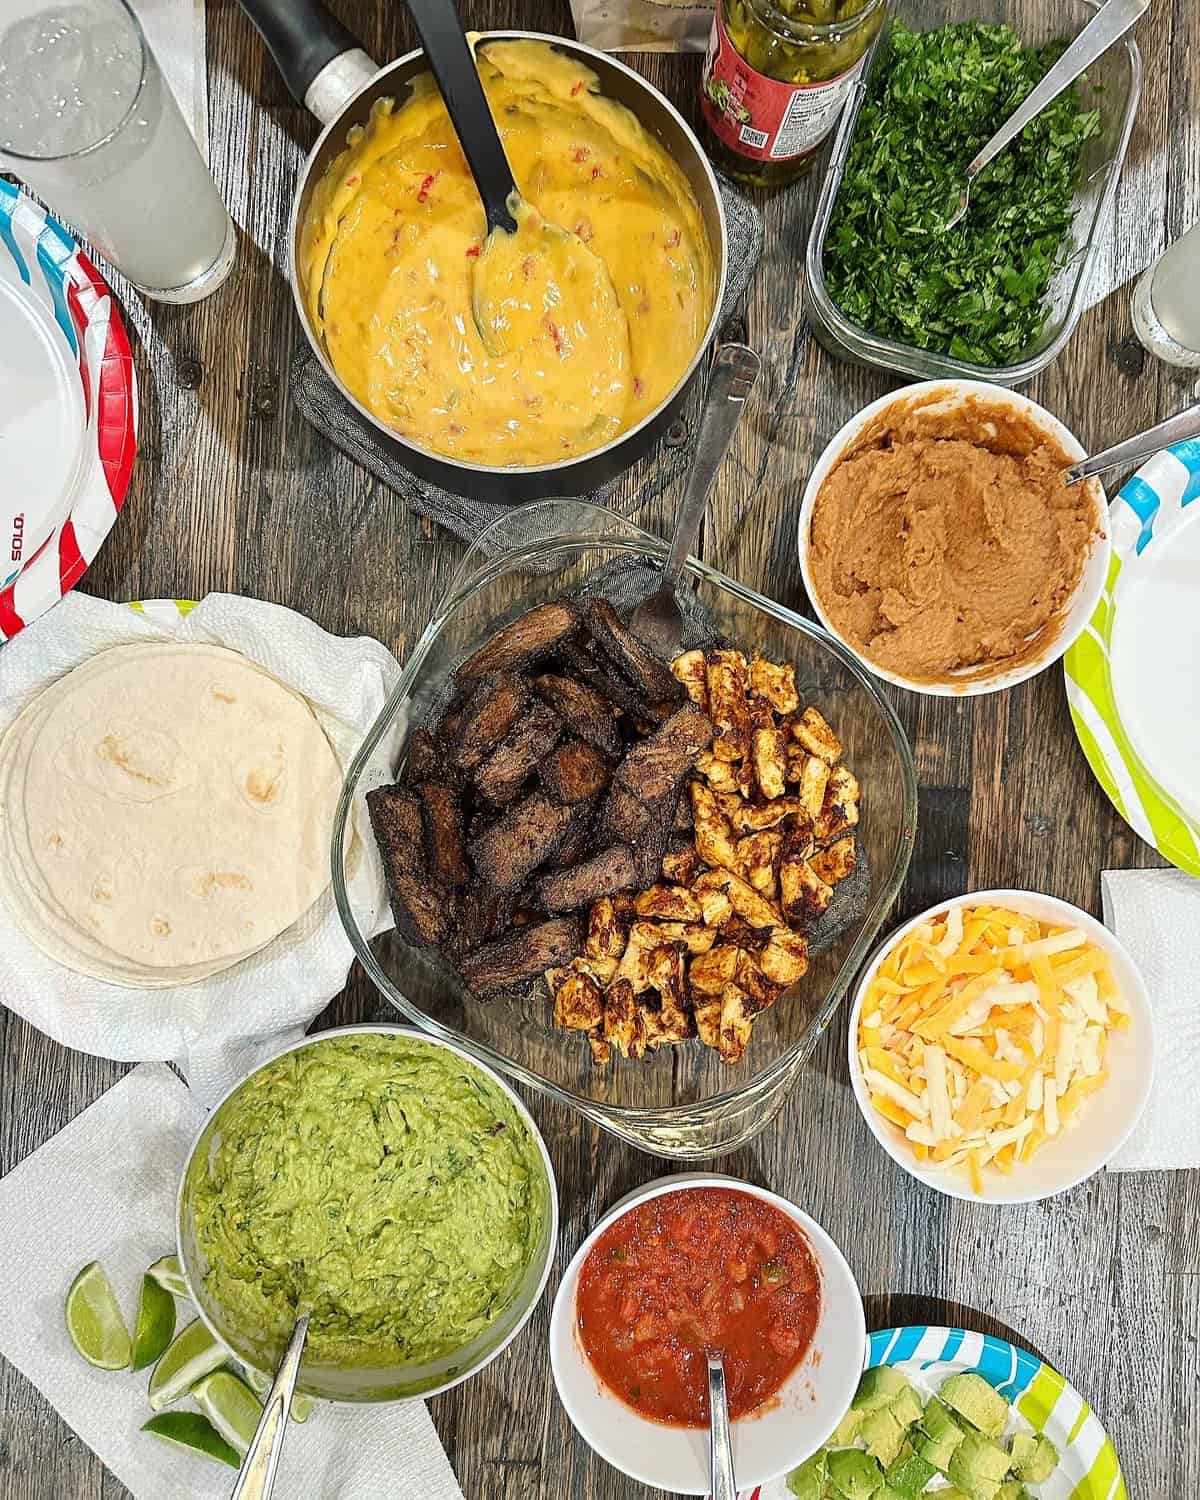 Fajita chicken and steak in a glass bowl surrounded by tortillas and bowls of queso, refried beans, guacamole, shredded cheese and salsa.